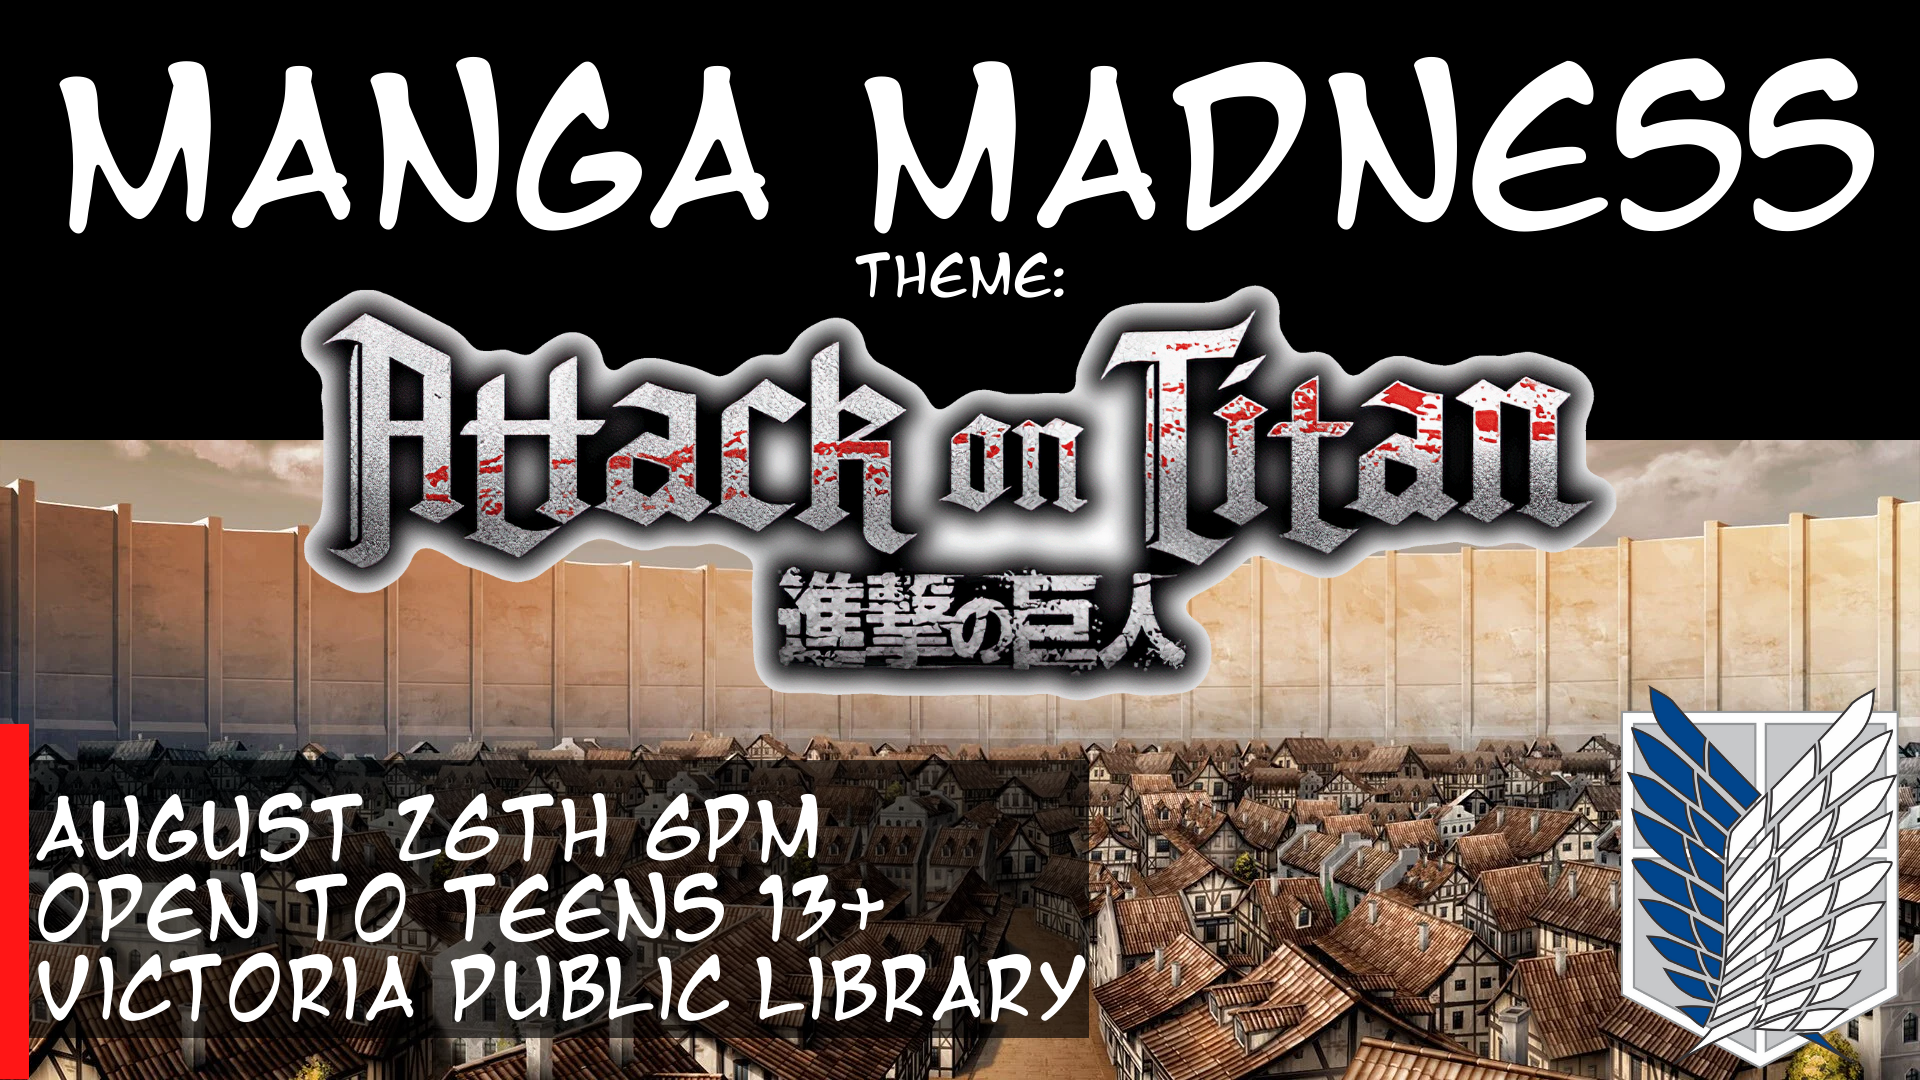 Manga Madness, Anime and Manga club for teens and Young Adults, August 26 at 6pm